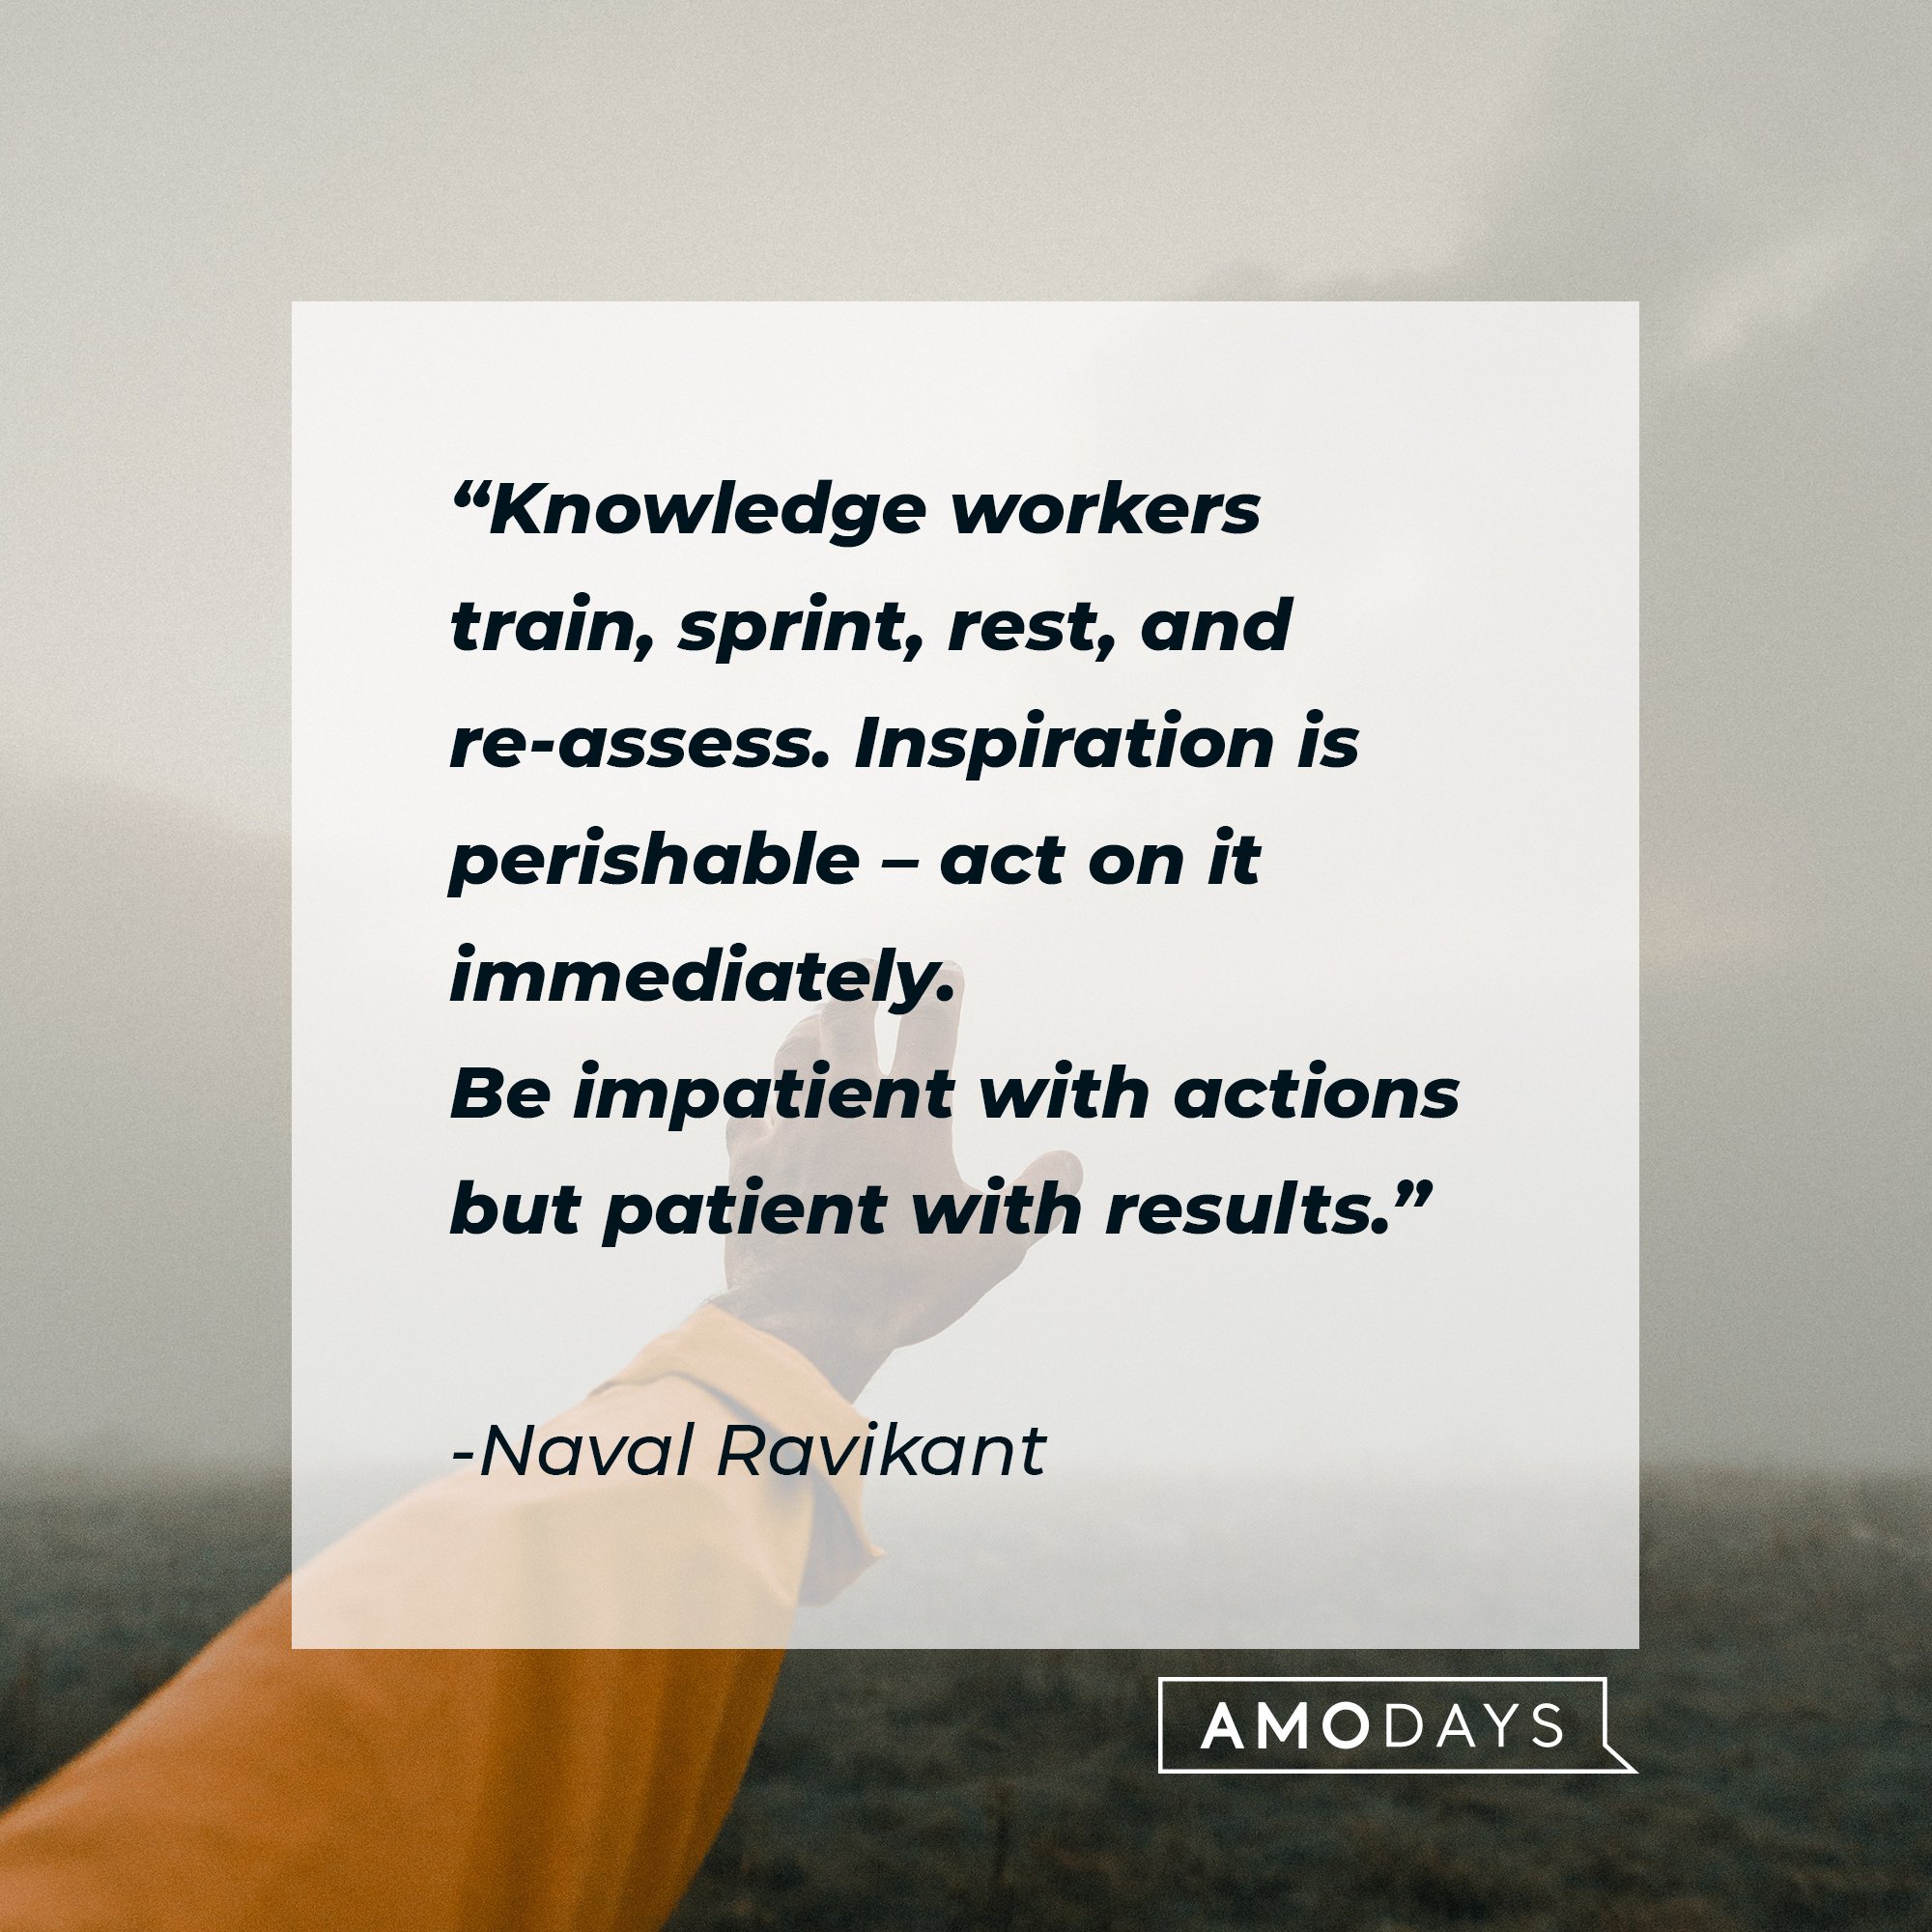 Naval Ravikant's quote: "Knowledge workers train, sprint, rest, and re-assess. Inspiration is perishable – act on it immediately. Be impatient with actions but patient with results." | Image: AmoDays